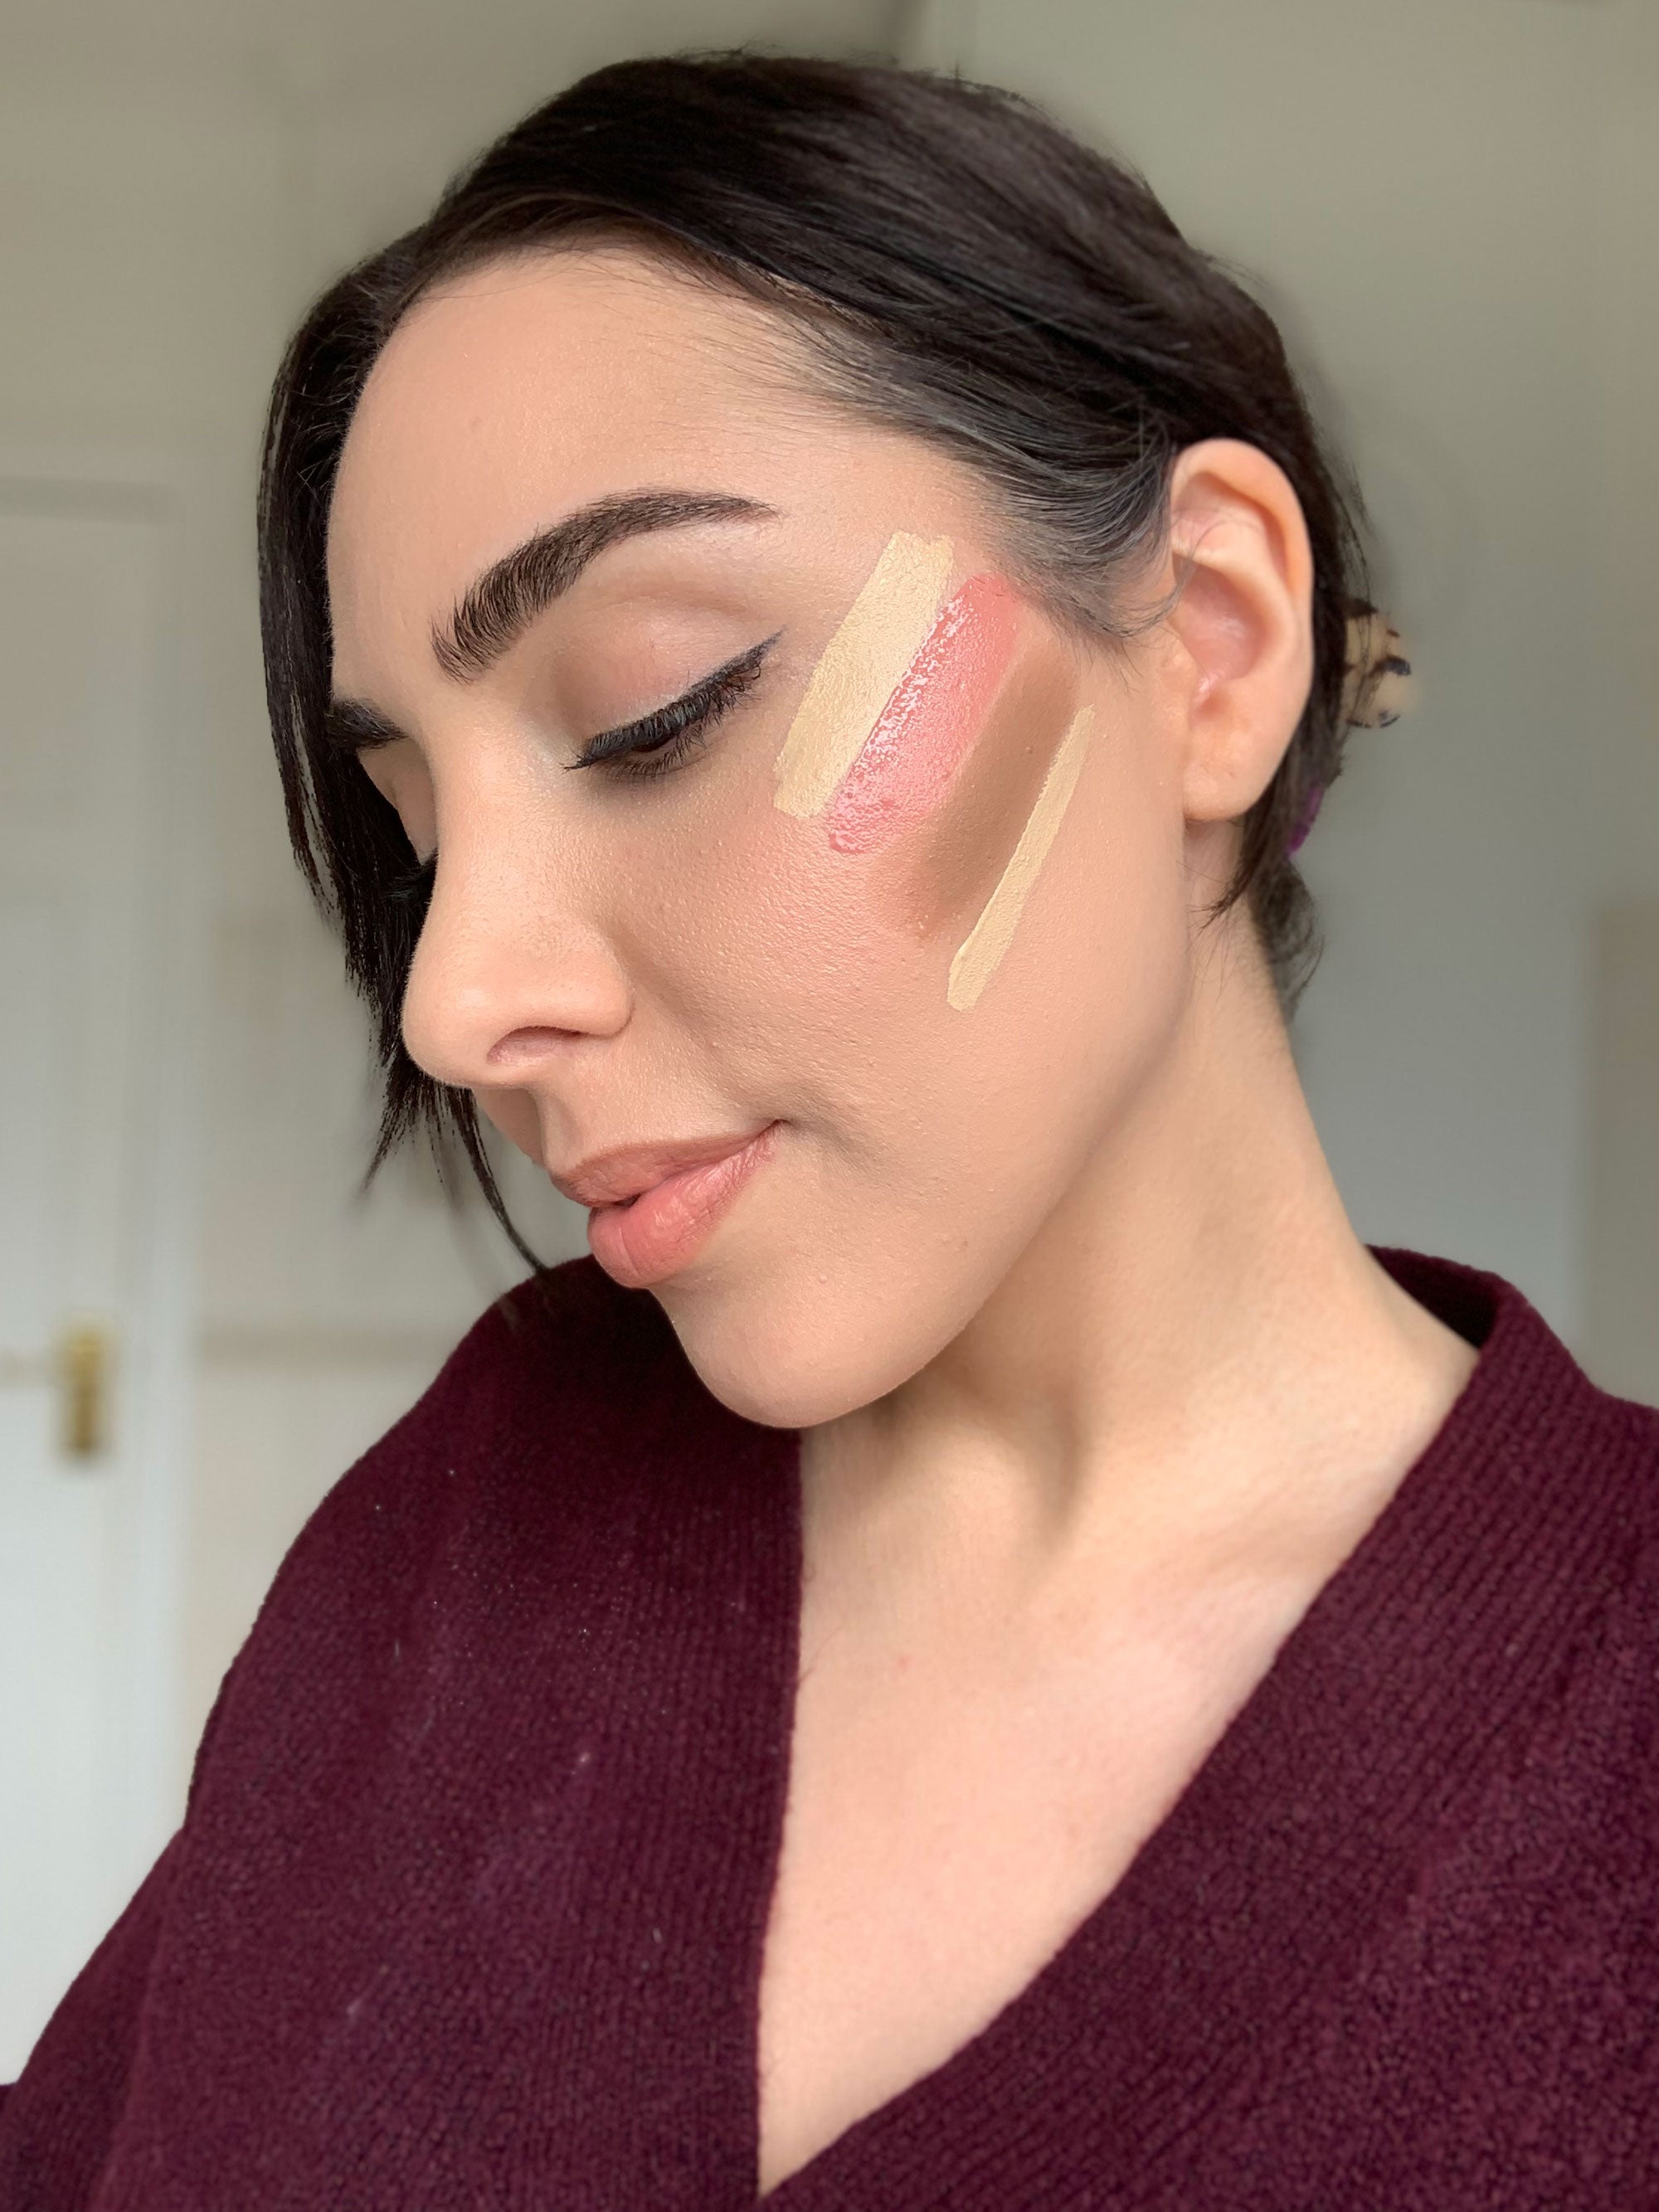 Rainbow Contouring Is The TikTok Beauty Hack You Need To Try